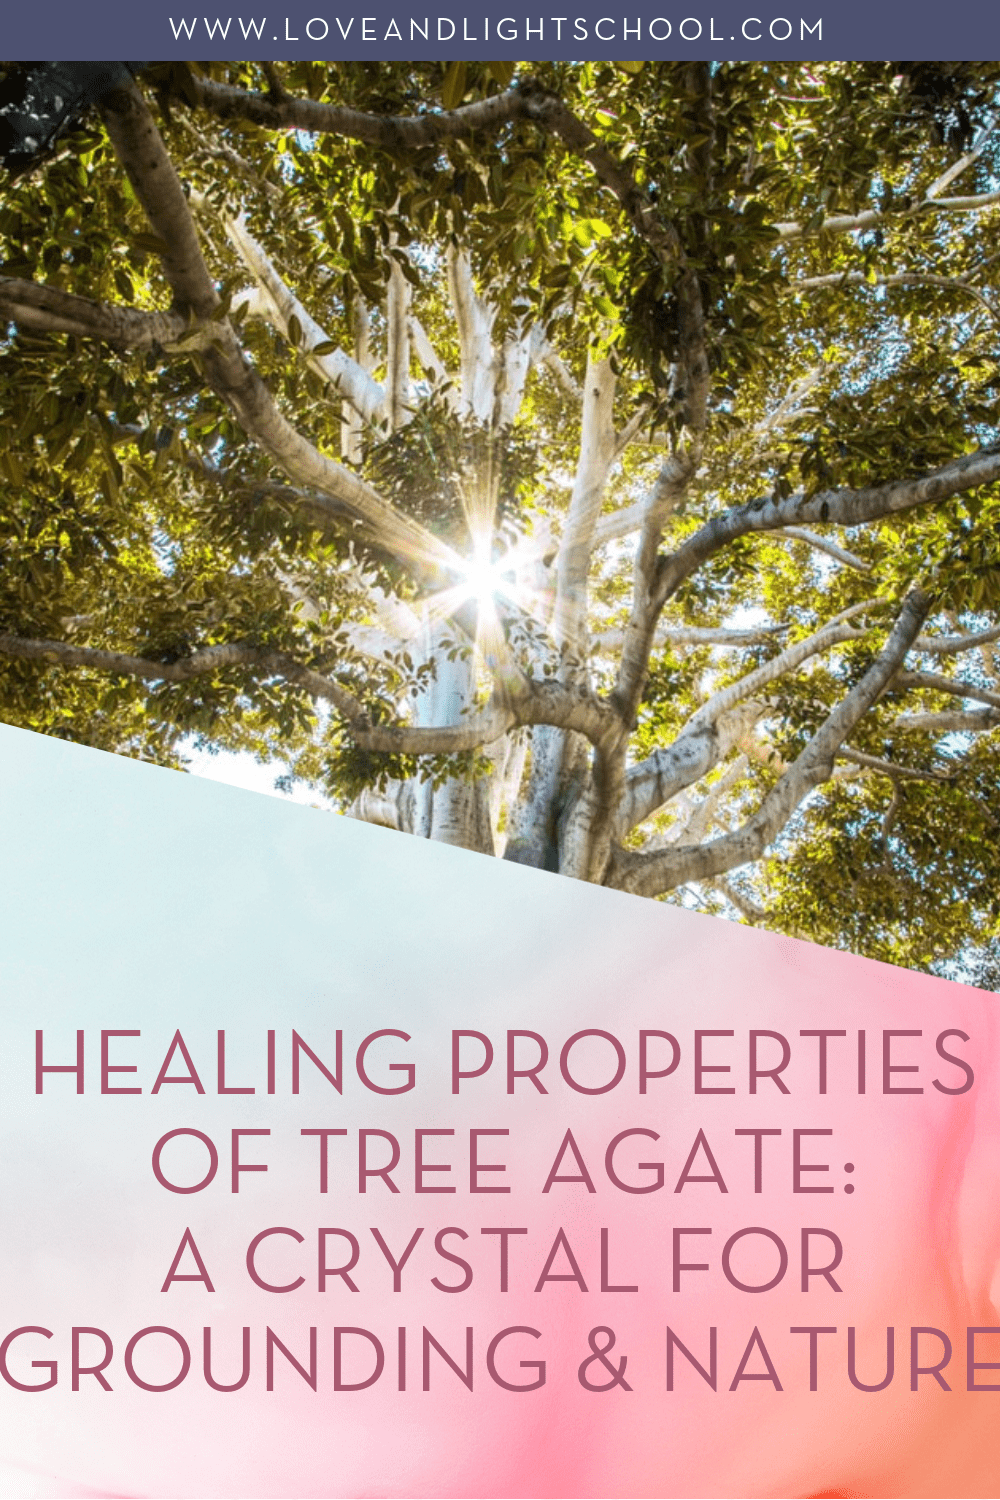 Healing Properties of Tree Agate: A Crystal for Grounding & Nature